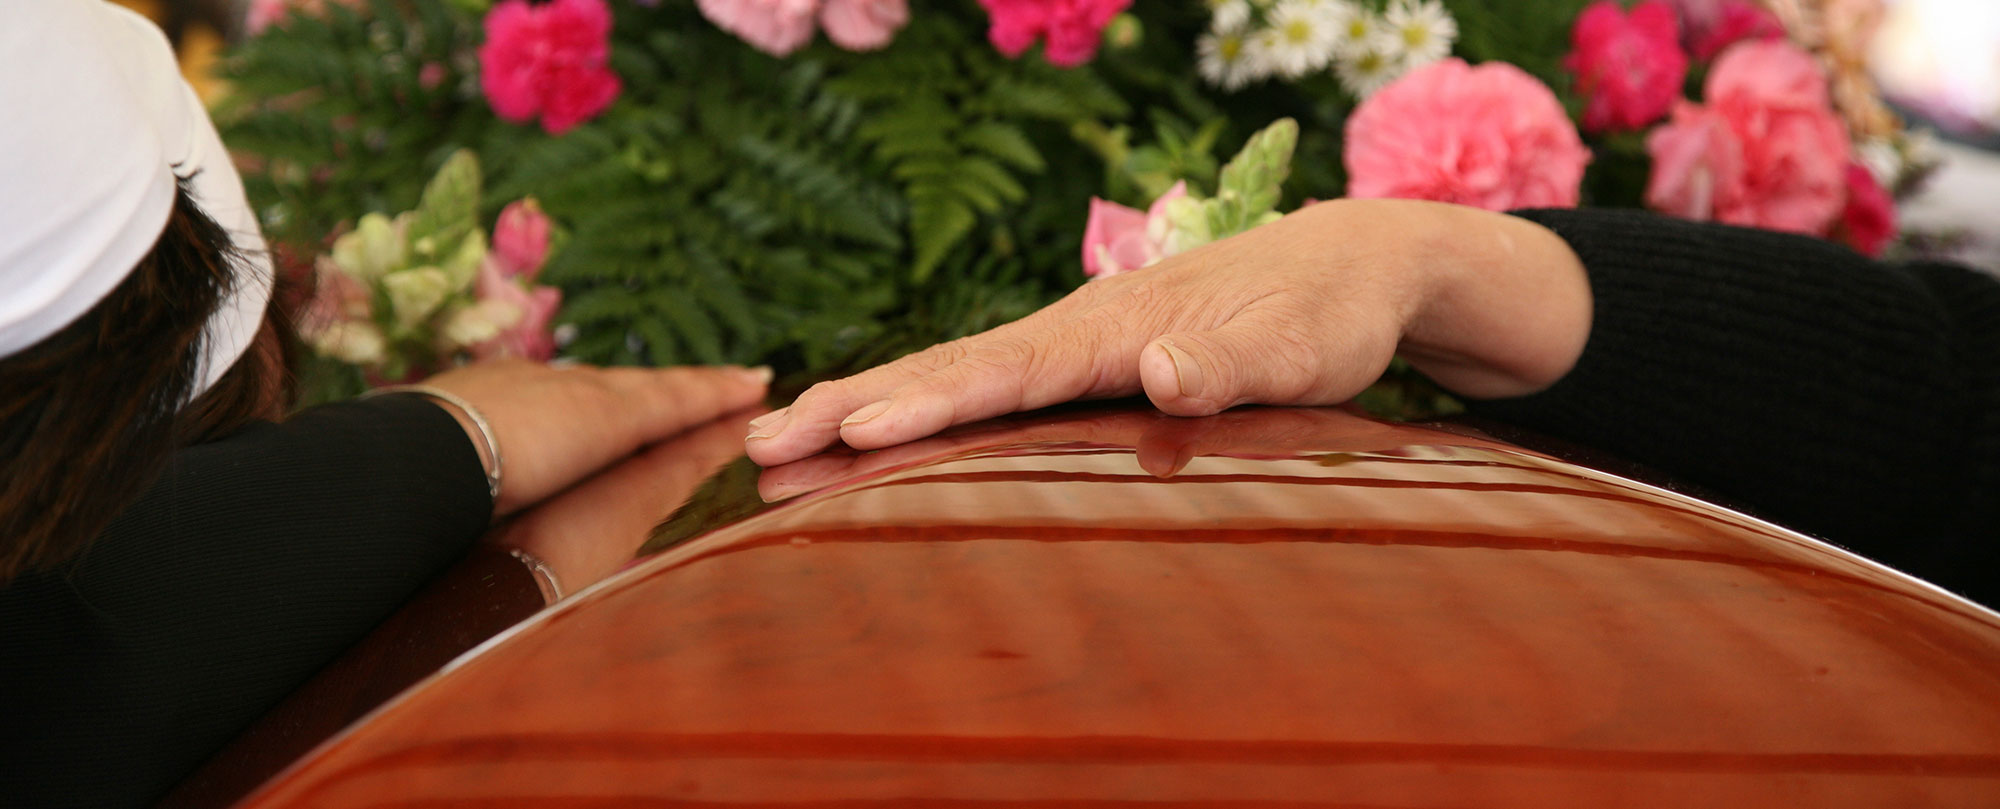 hand on coffin with flowers during daytime funeral